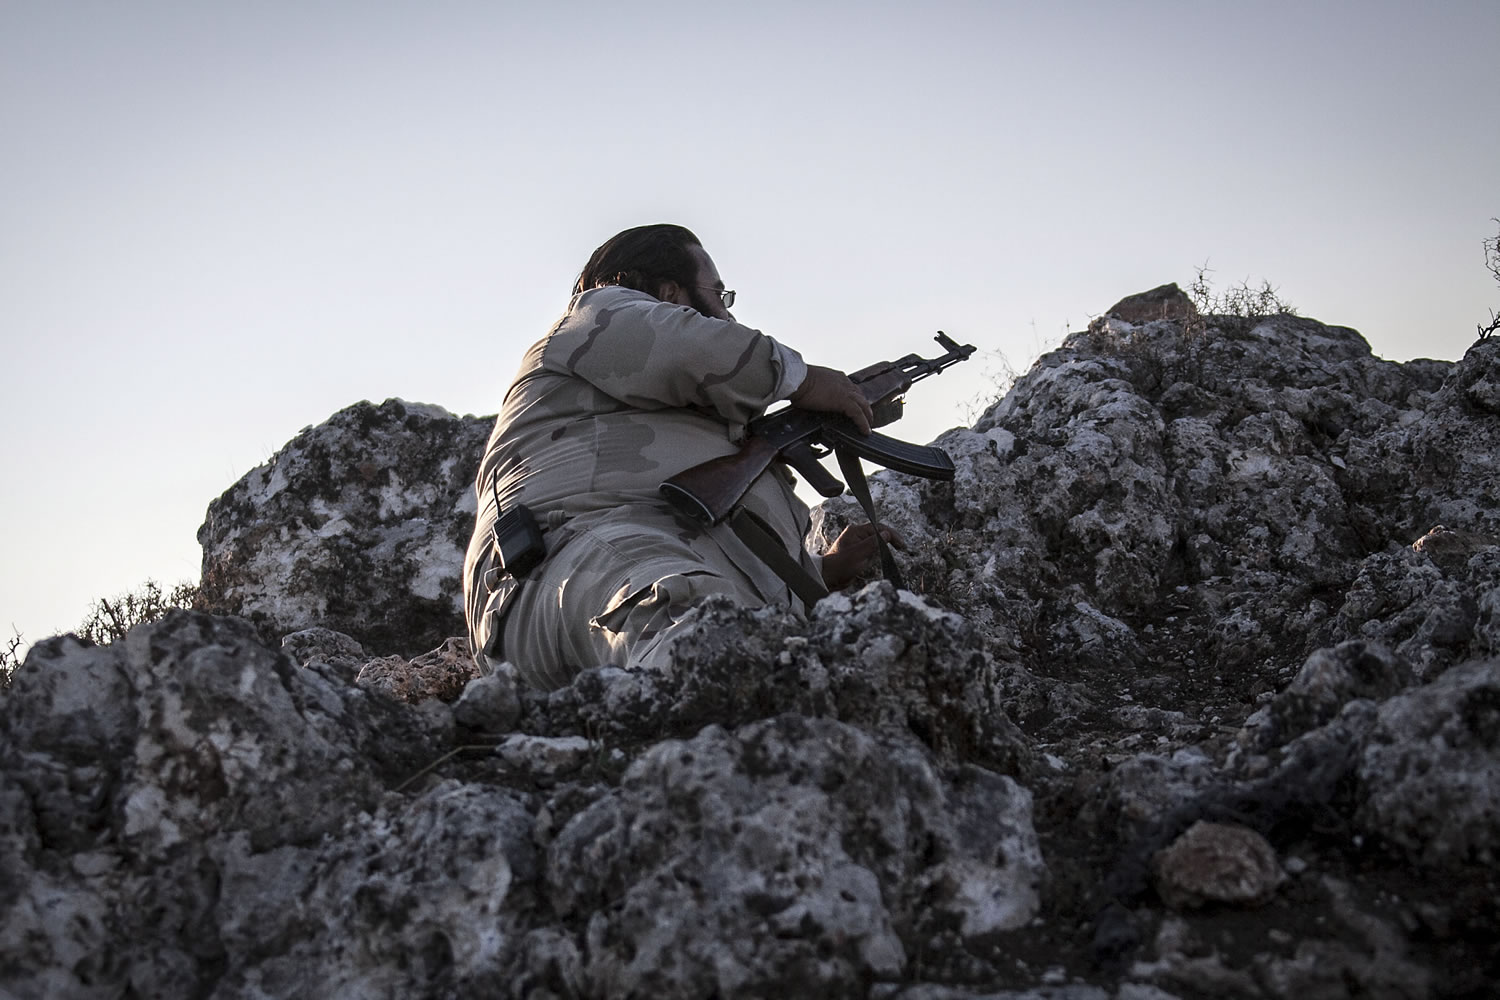 A Syrian opposition fighter takes cover during exchange of fire with government forces in Telata village, a frontline located at the top of a mountain in the Idlib province, northwest countryside of Syria on Sunday.